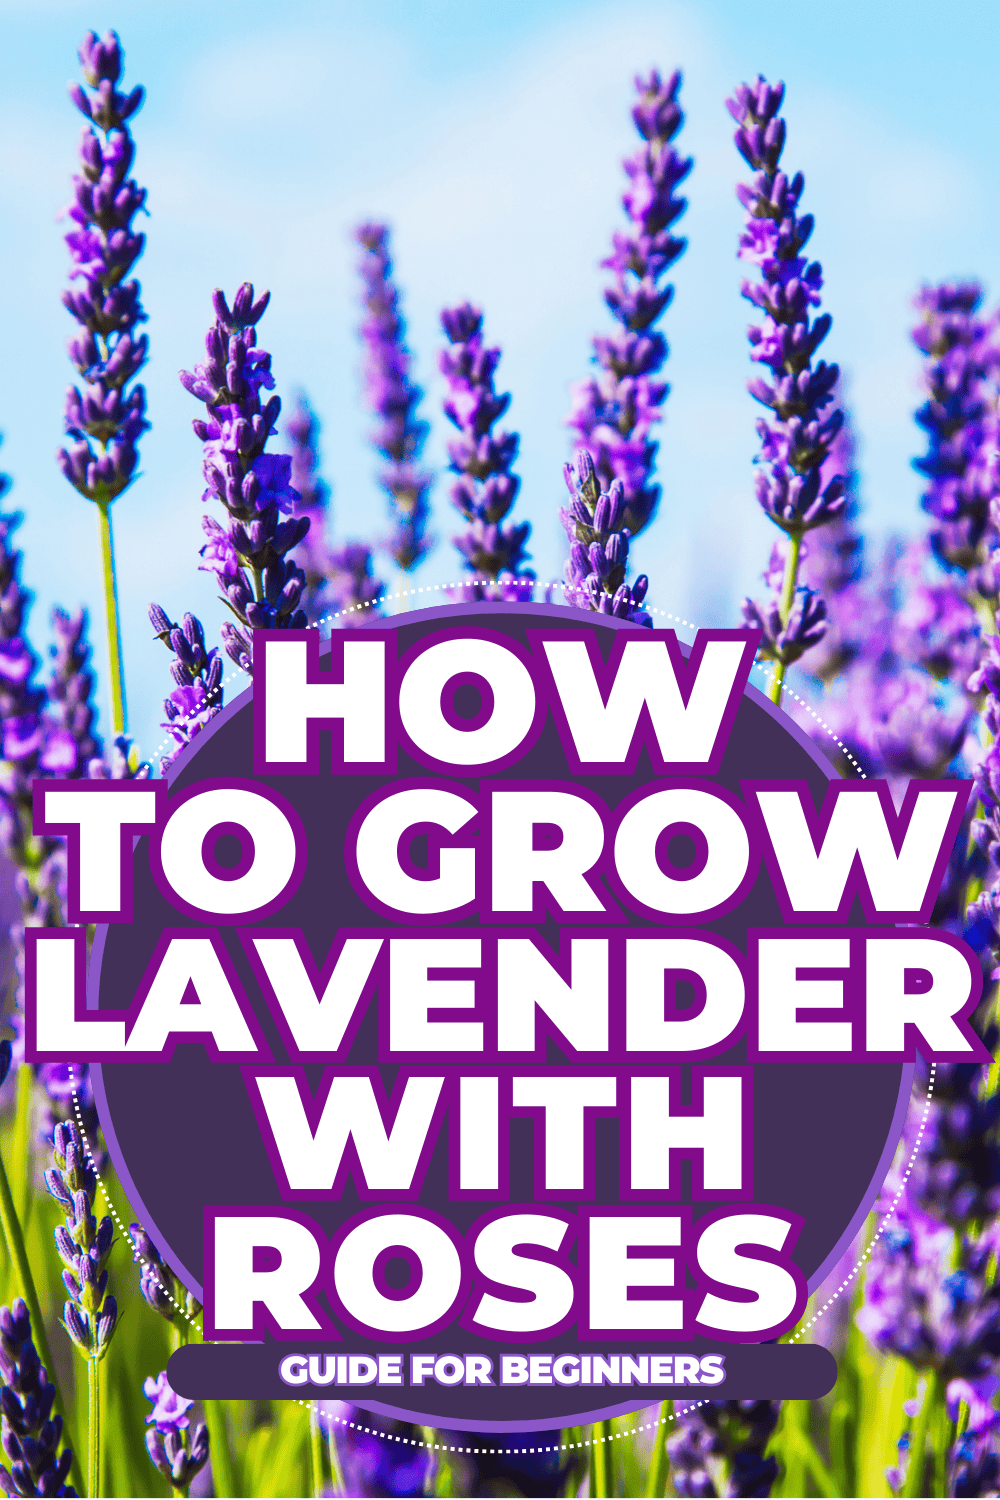 How To Grow Lavender With Roses [Guide For Beginners]